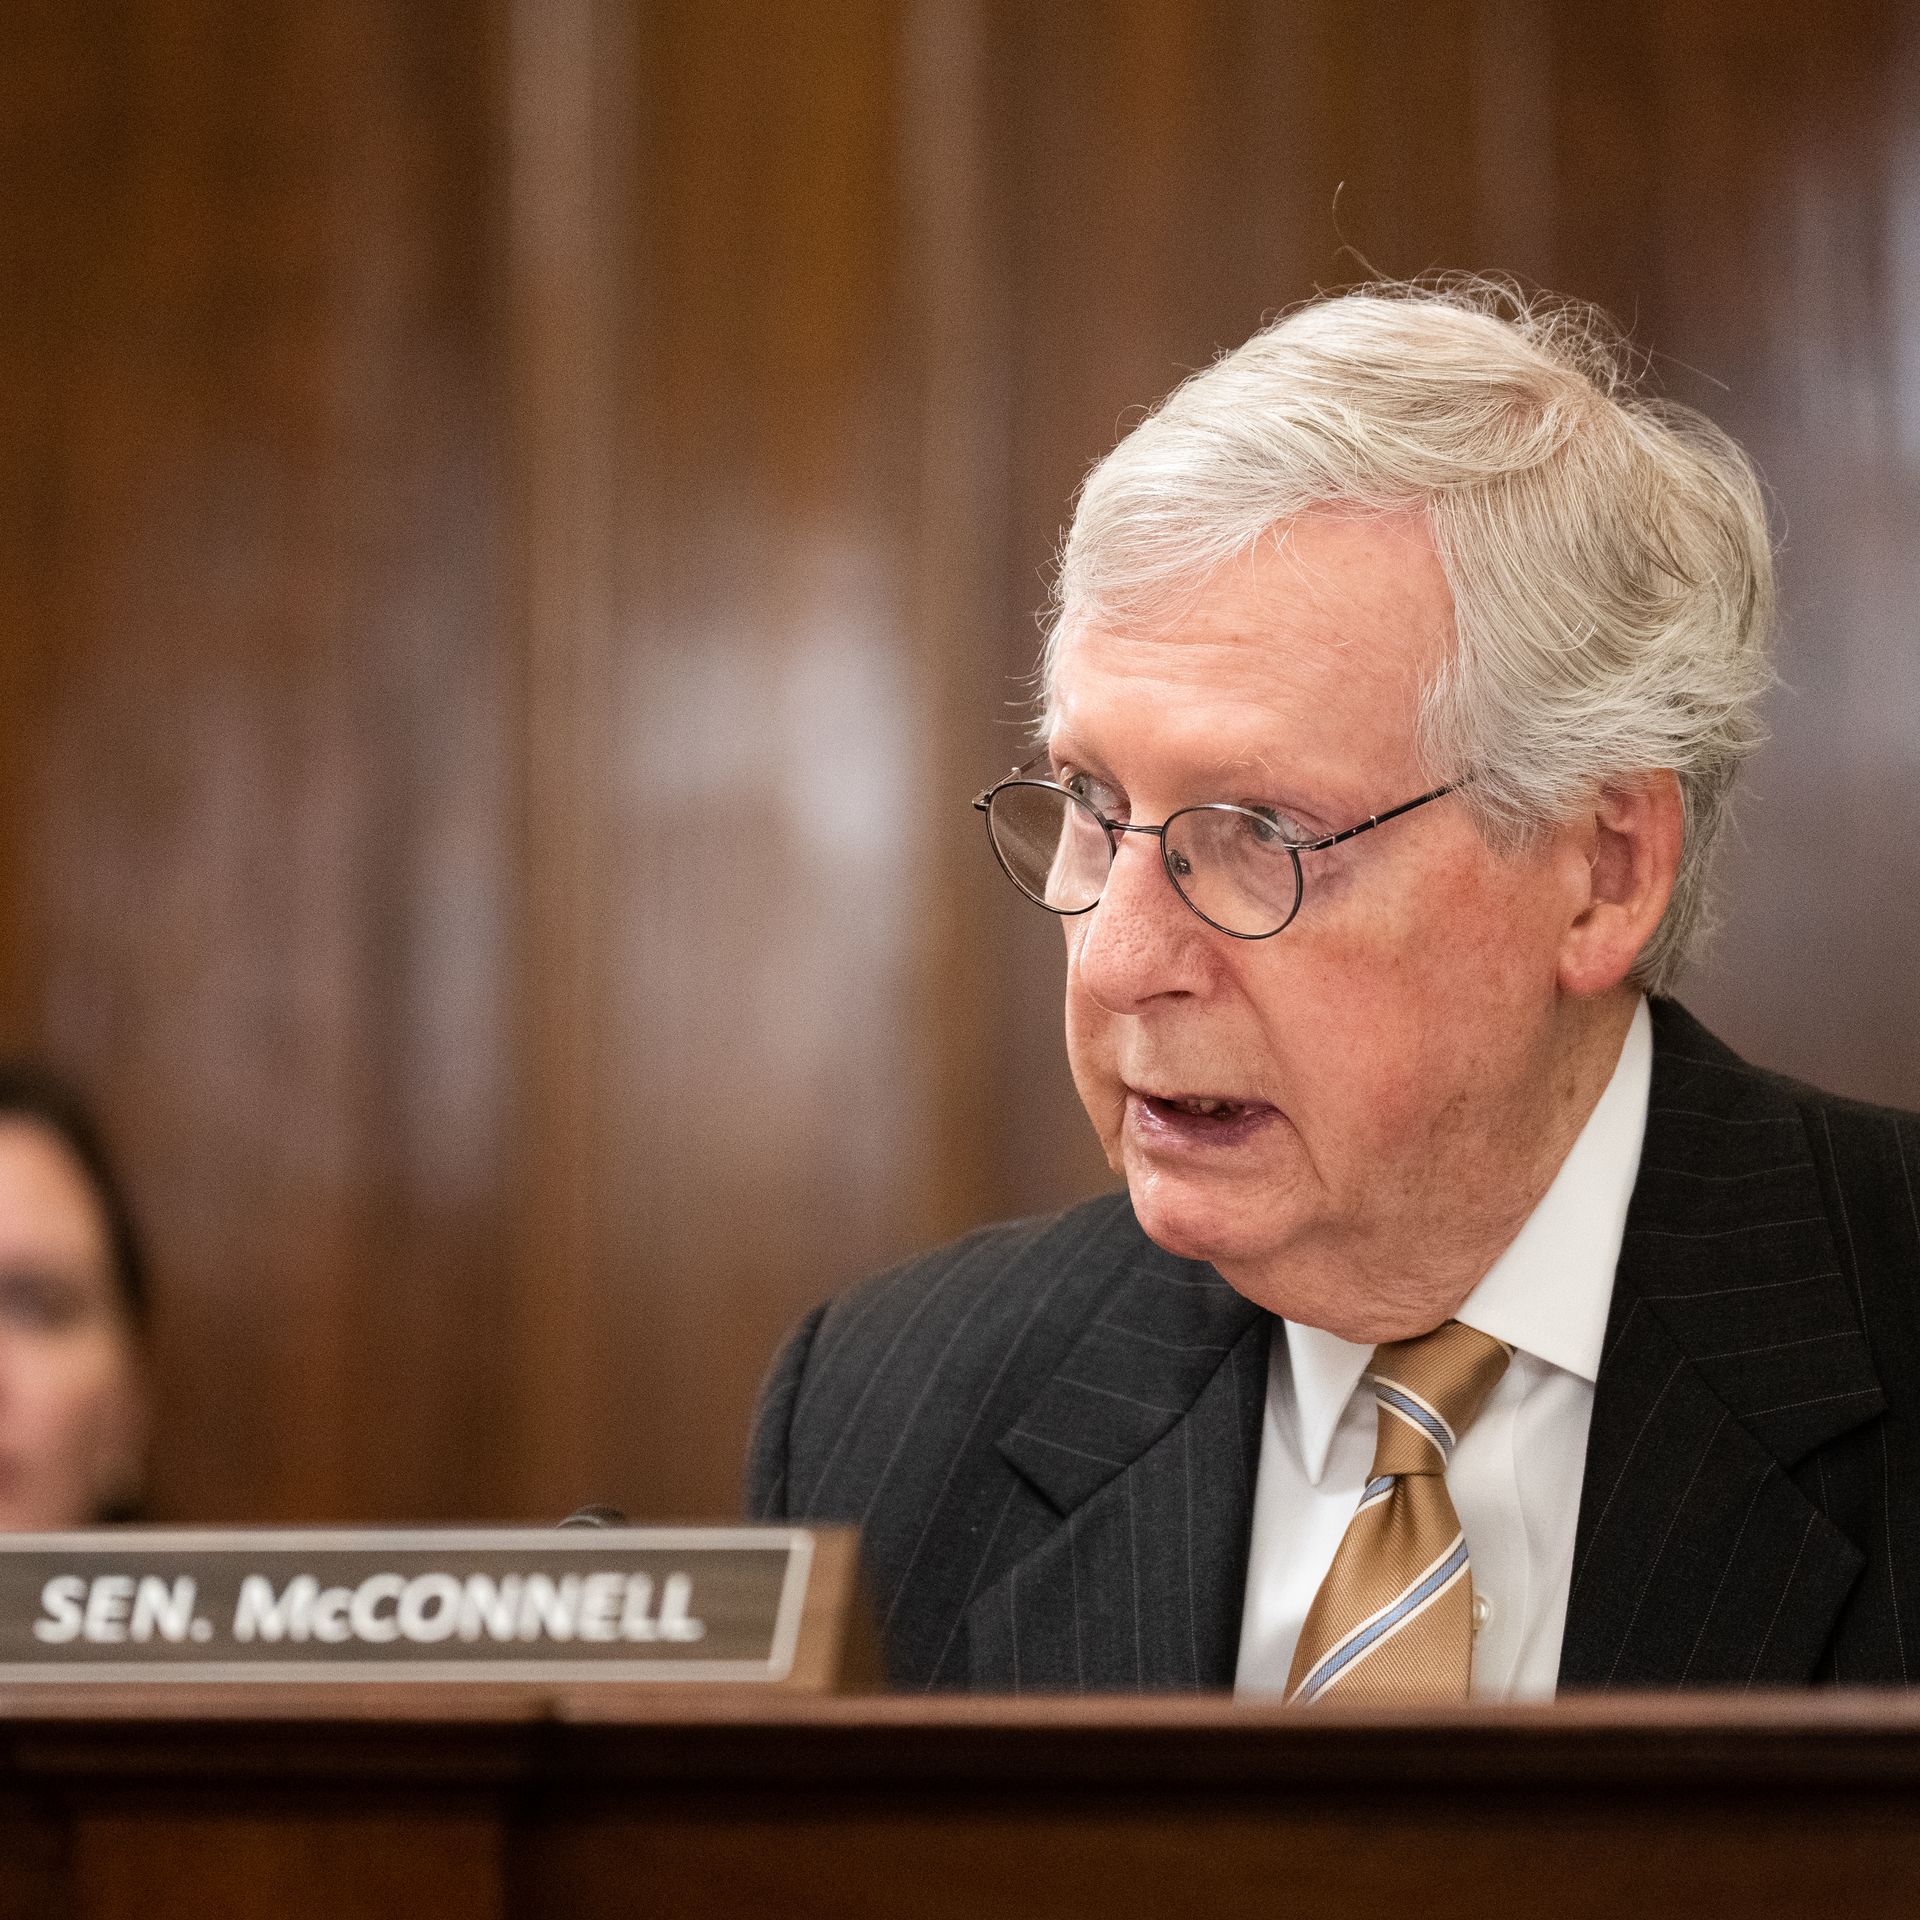 Senate Minority Leader Mitch McConnell (R-Ky.) at a Senate Rules Committee hearing.